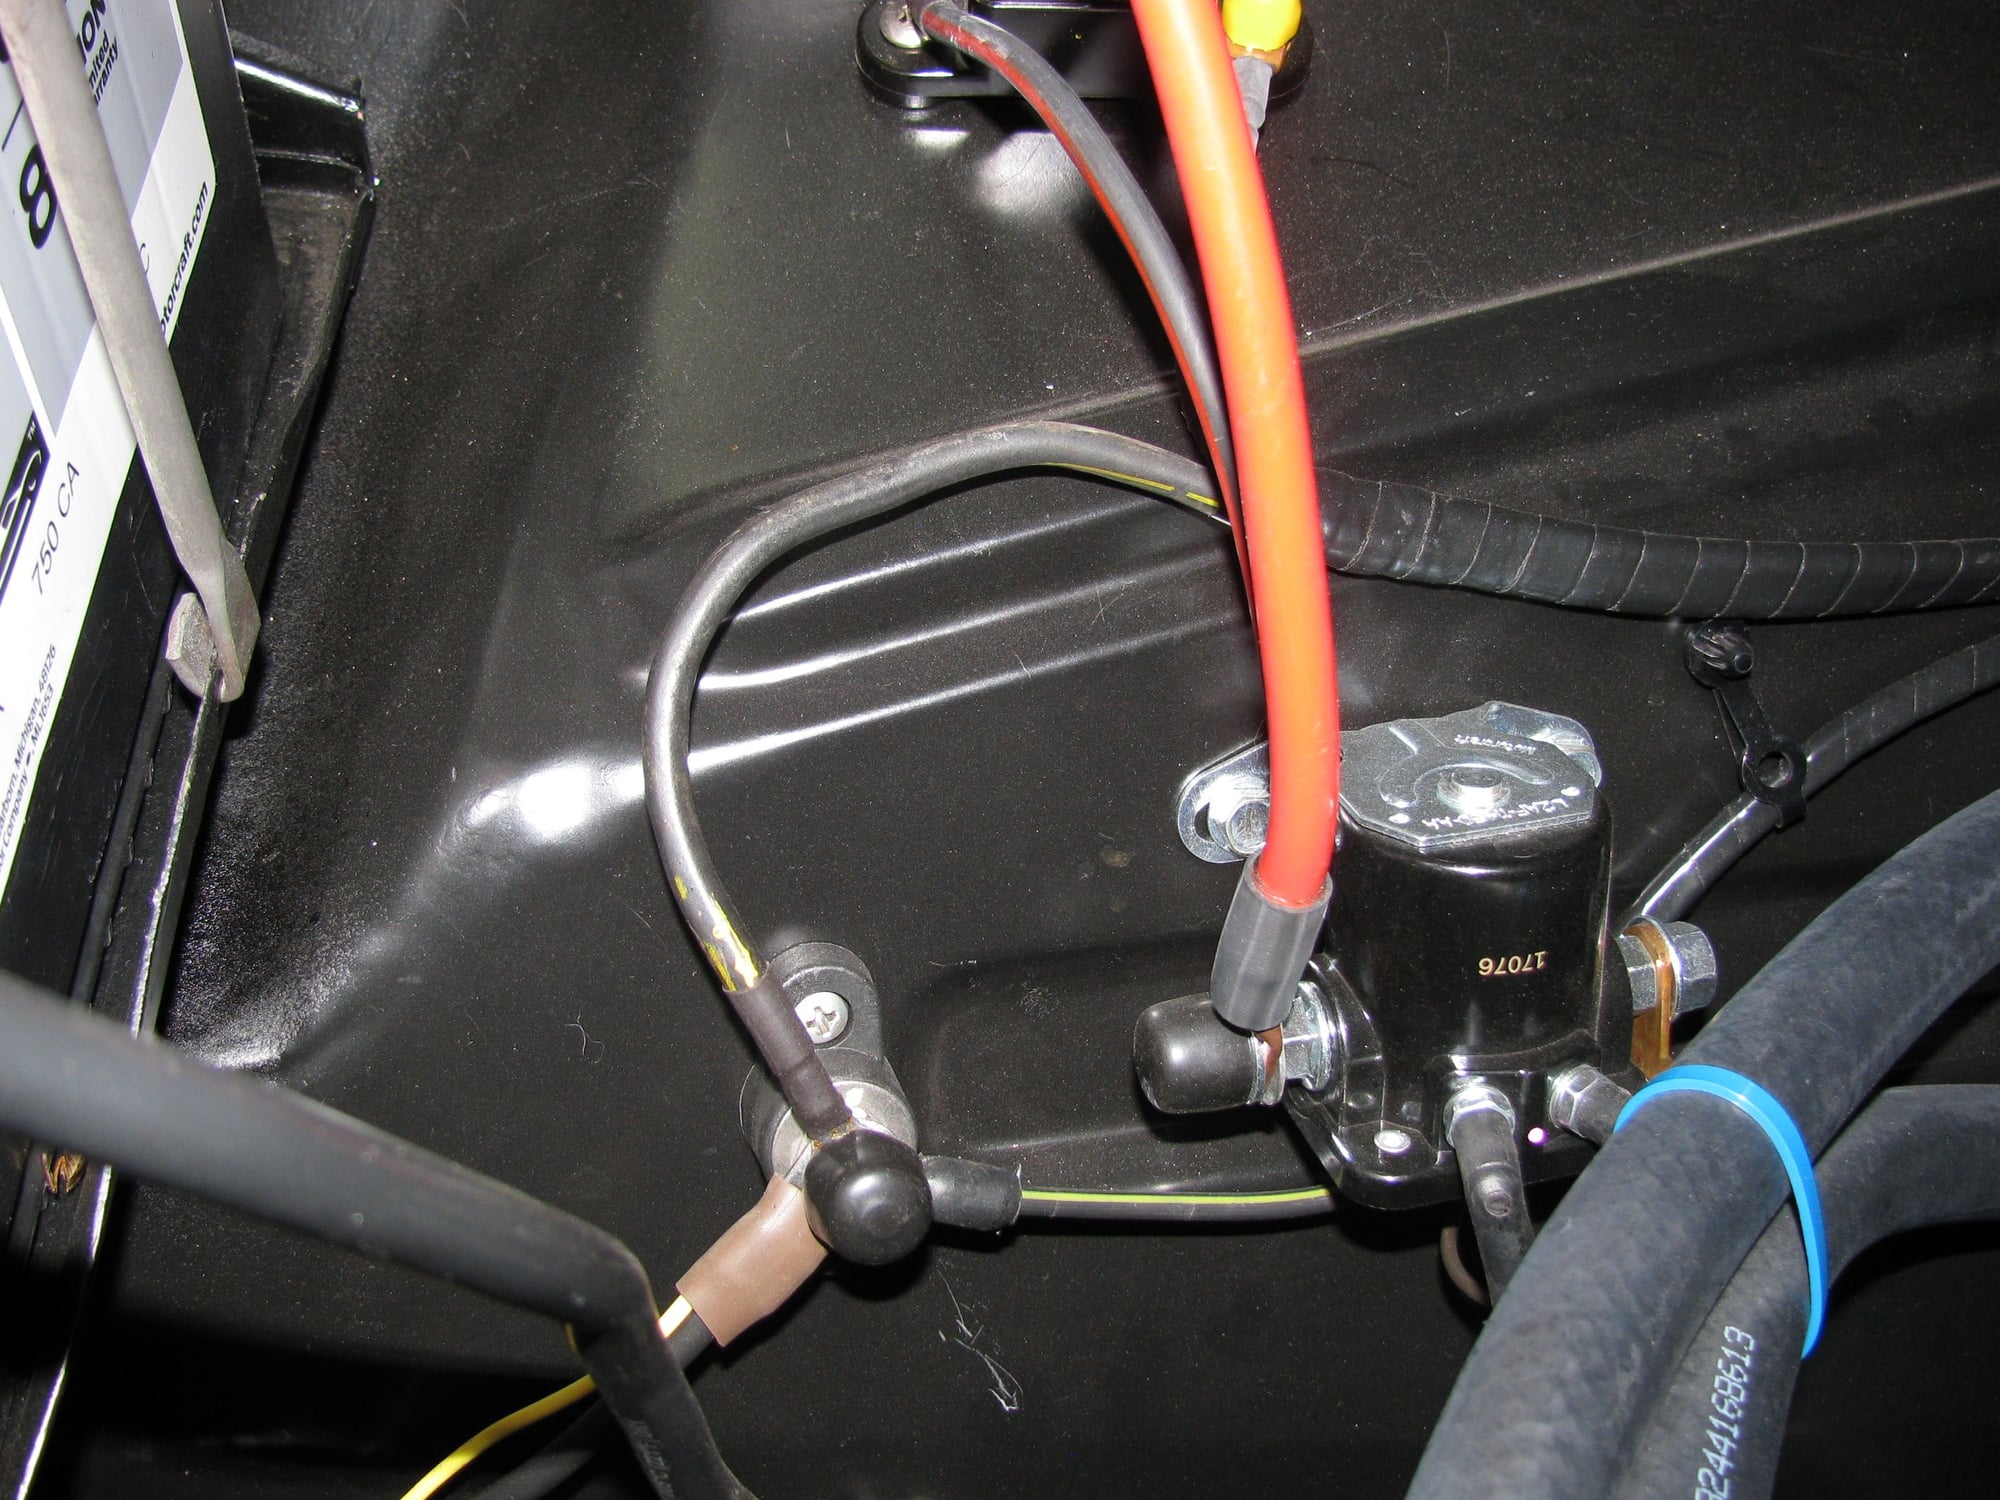 66 Ford F100 Cluster Amp and Oil Wiring - Ford Truck Enthusiasts Forums